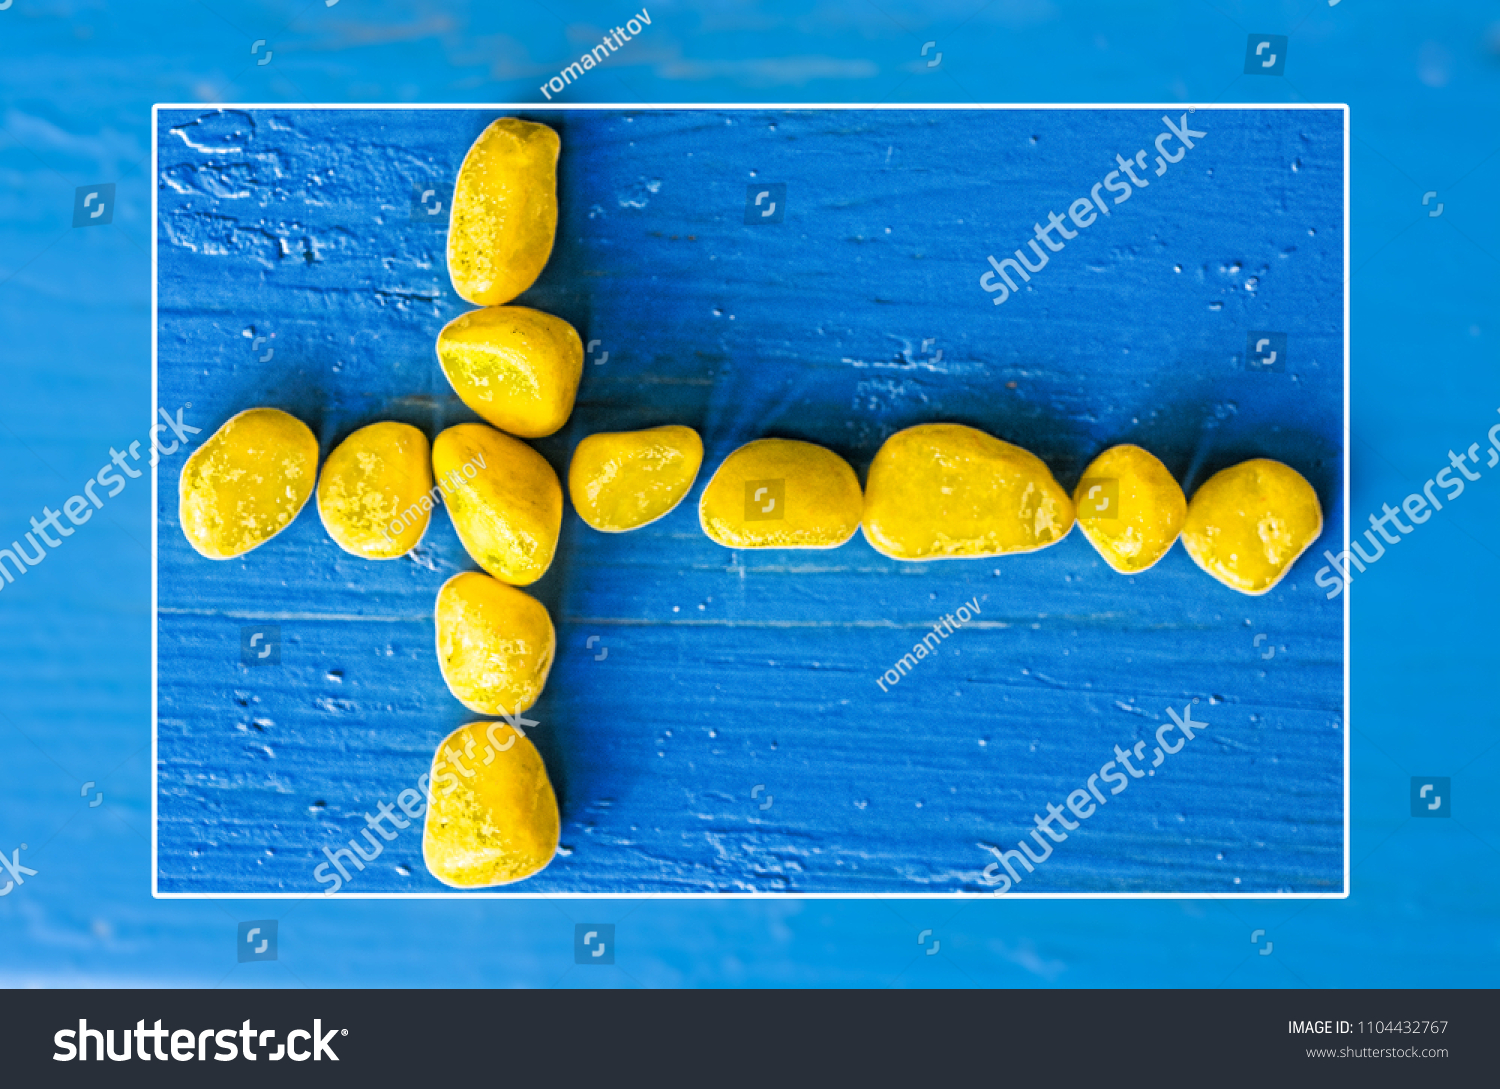 original flag of Sweden from yellow stones on a blue background #1104432767